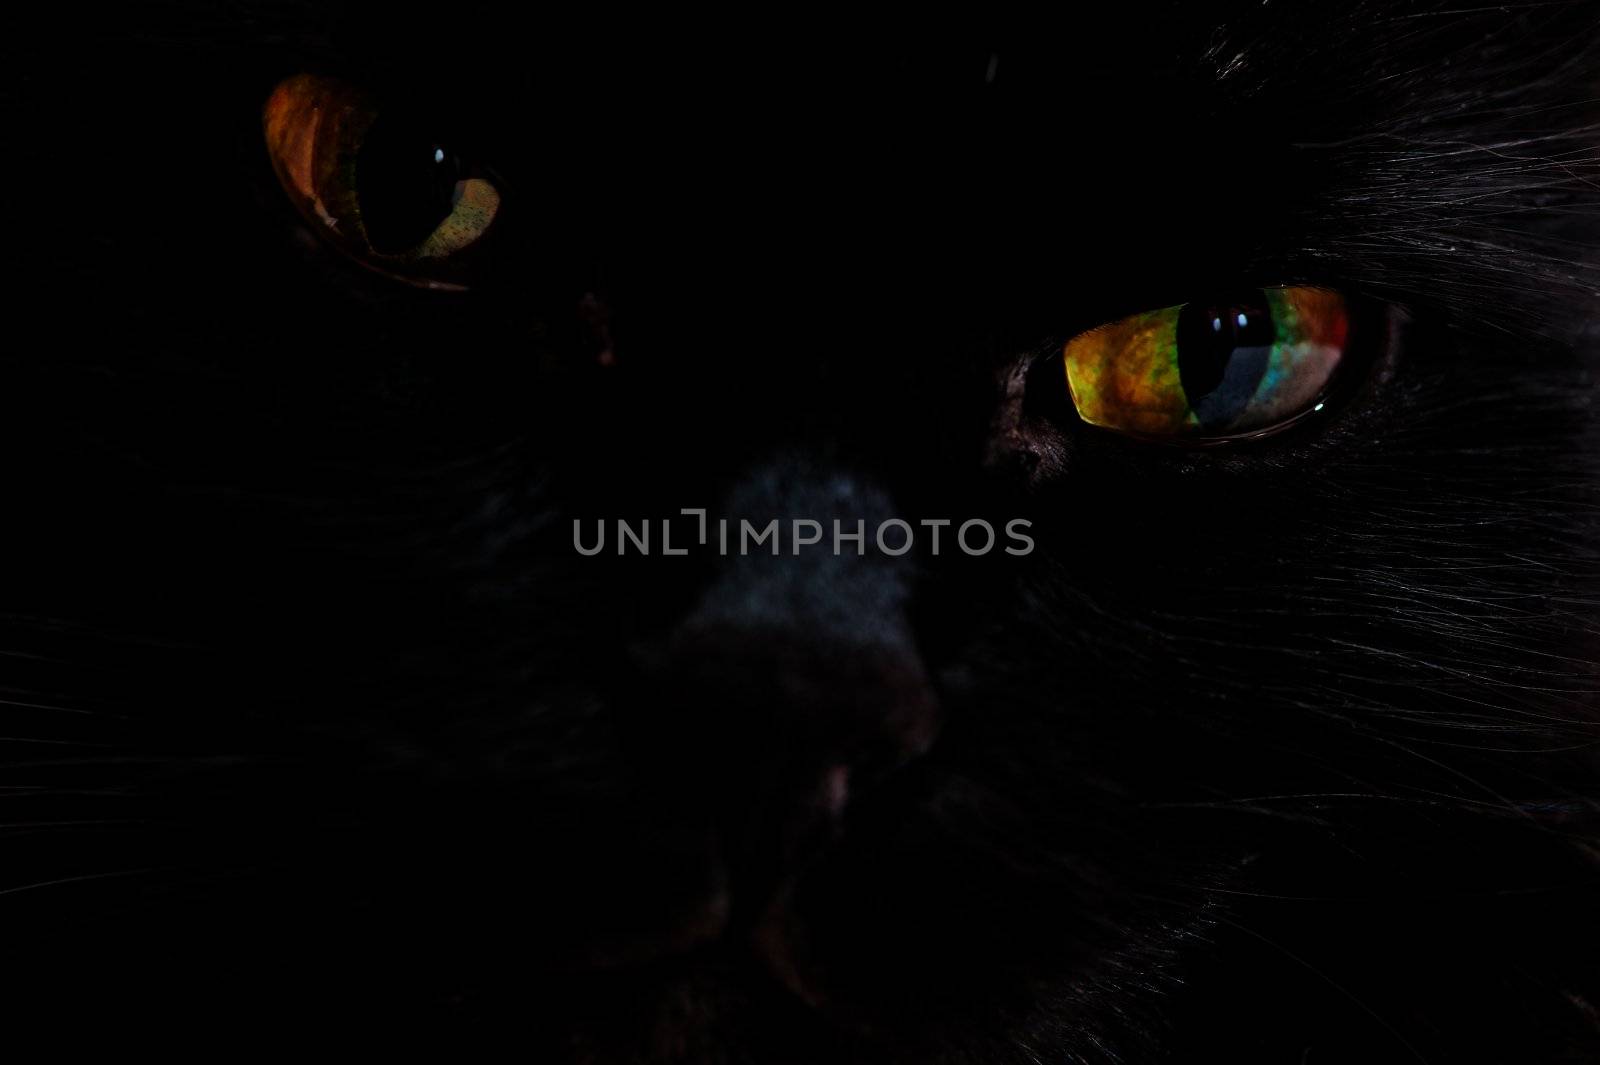 Portrait of the muzzle of a black cat by kosmsos111